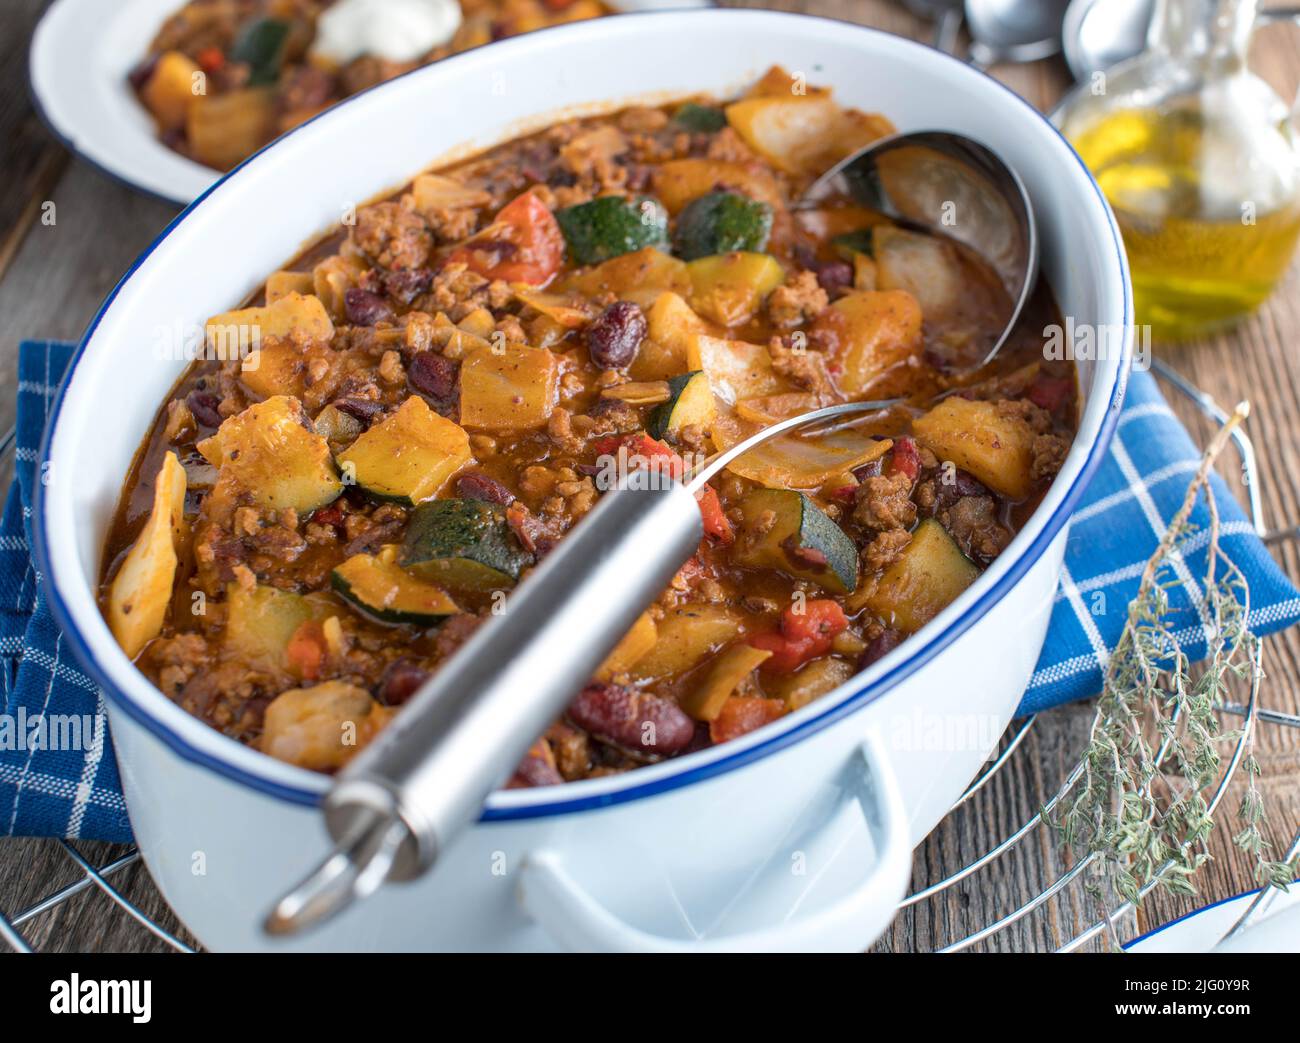 Healthy family meal with a minced meat stew, cabbage, vegetables and kidney beans. Served in pot on kitchen table Stock Photo